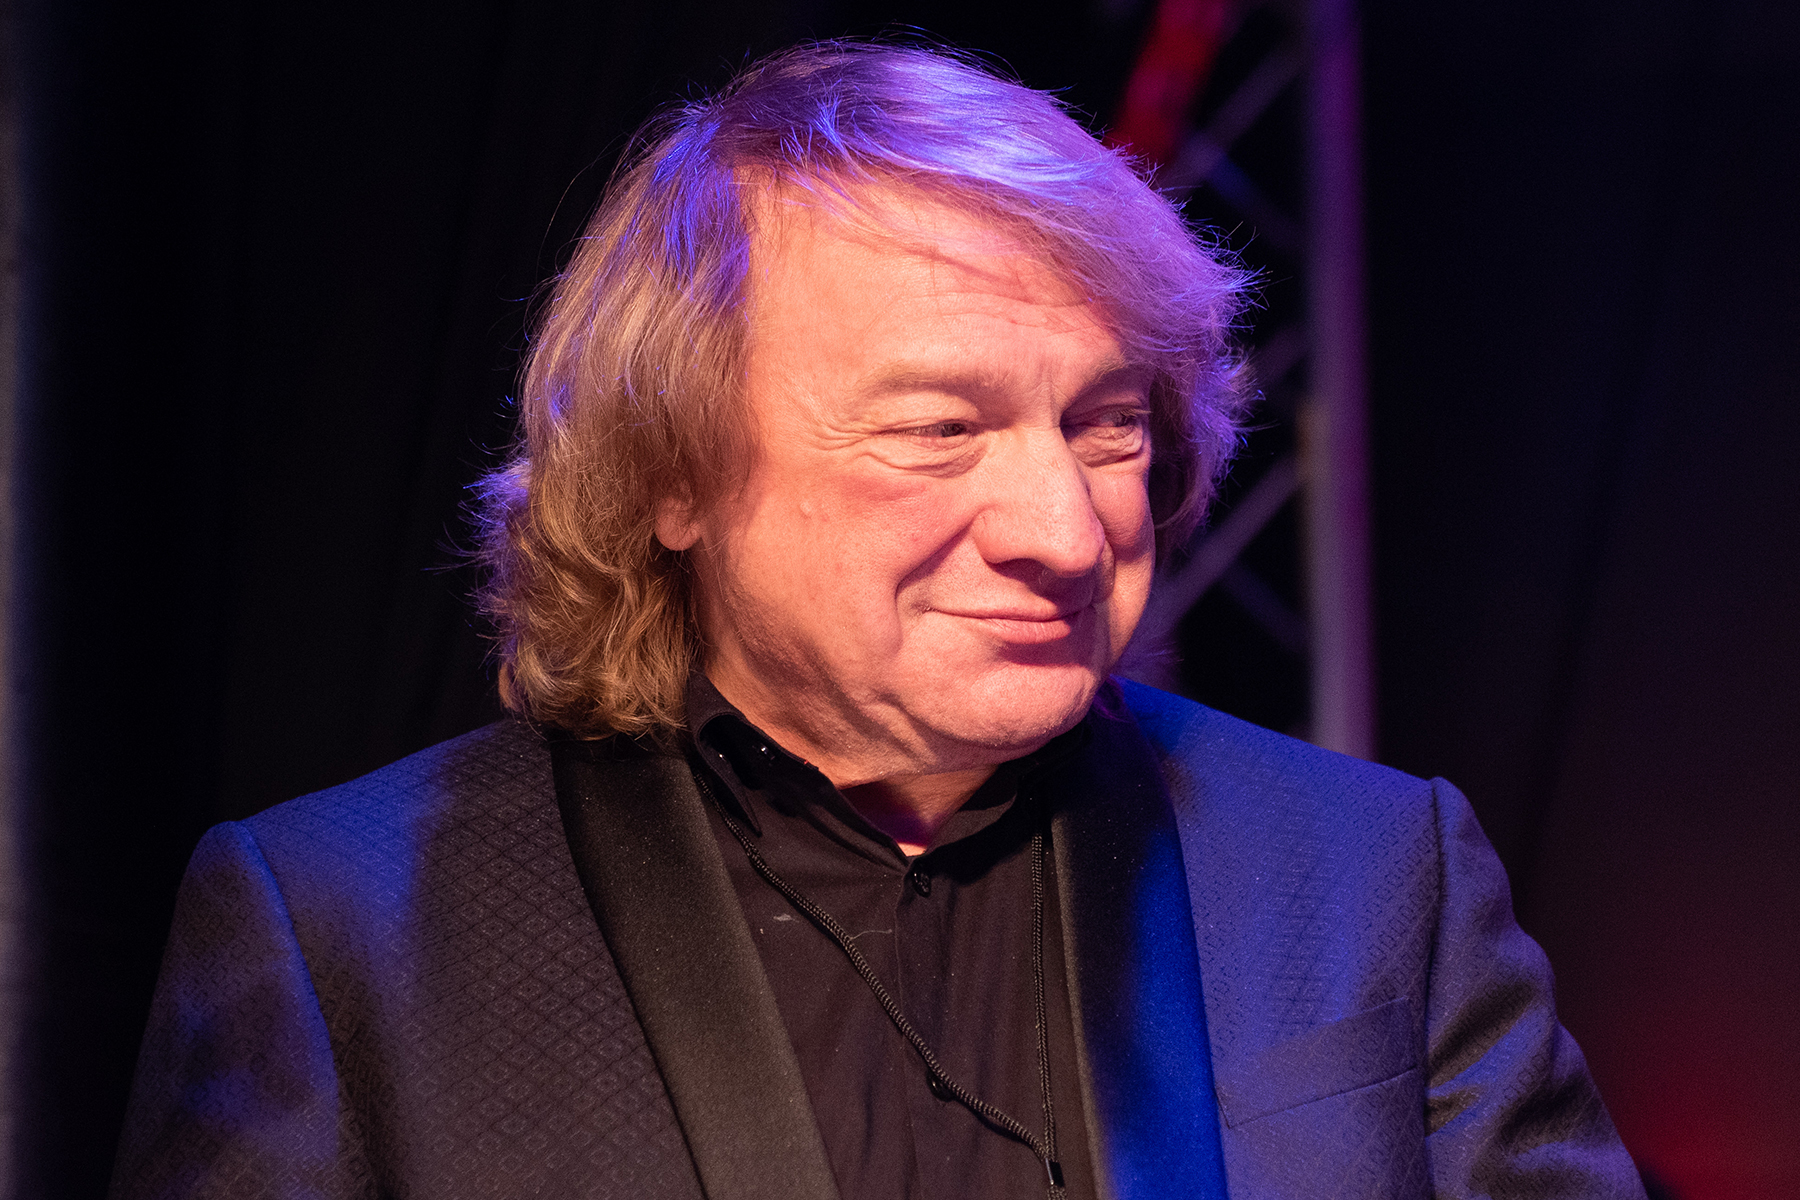 Lou Gramm on Foreigner’s Long-Awaited Rock Hall Induction: ‘Justice Has Been Done’